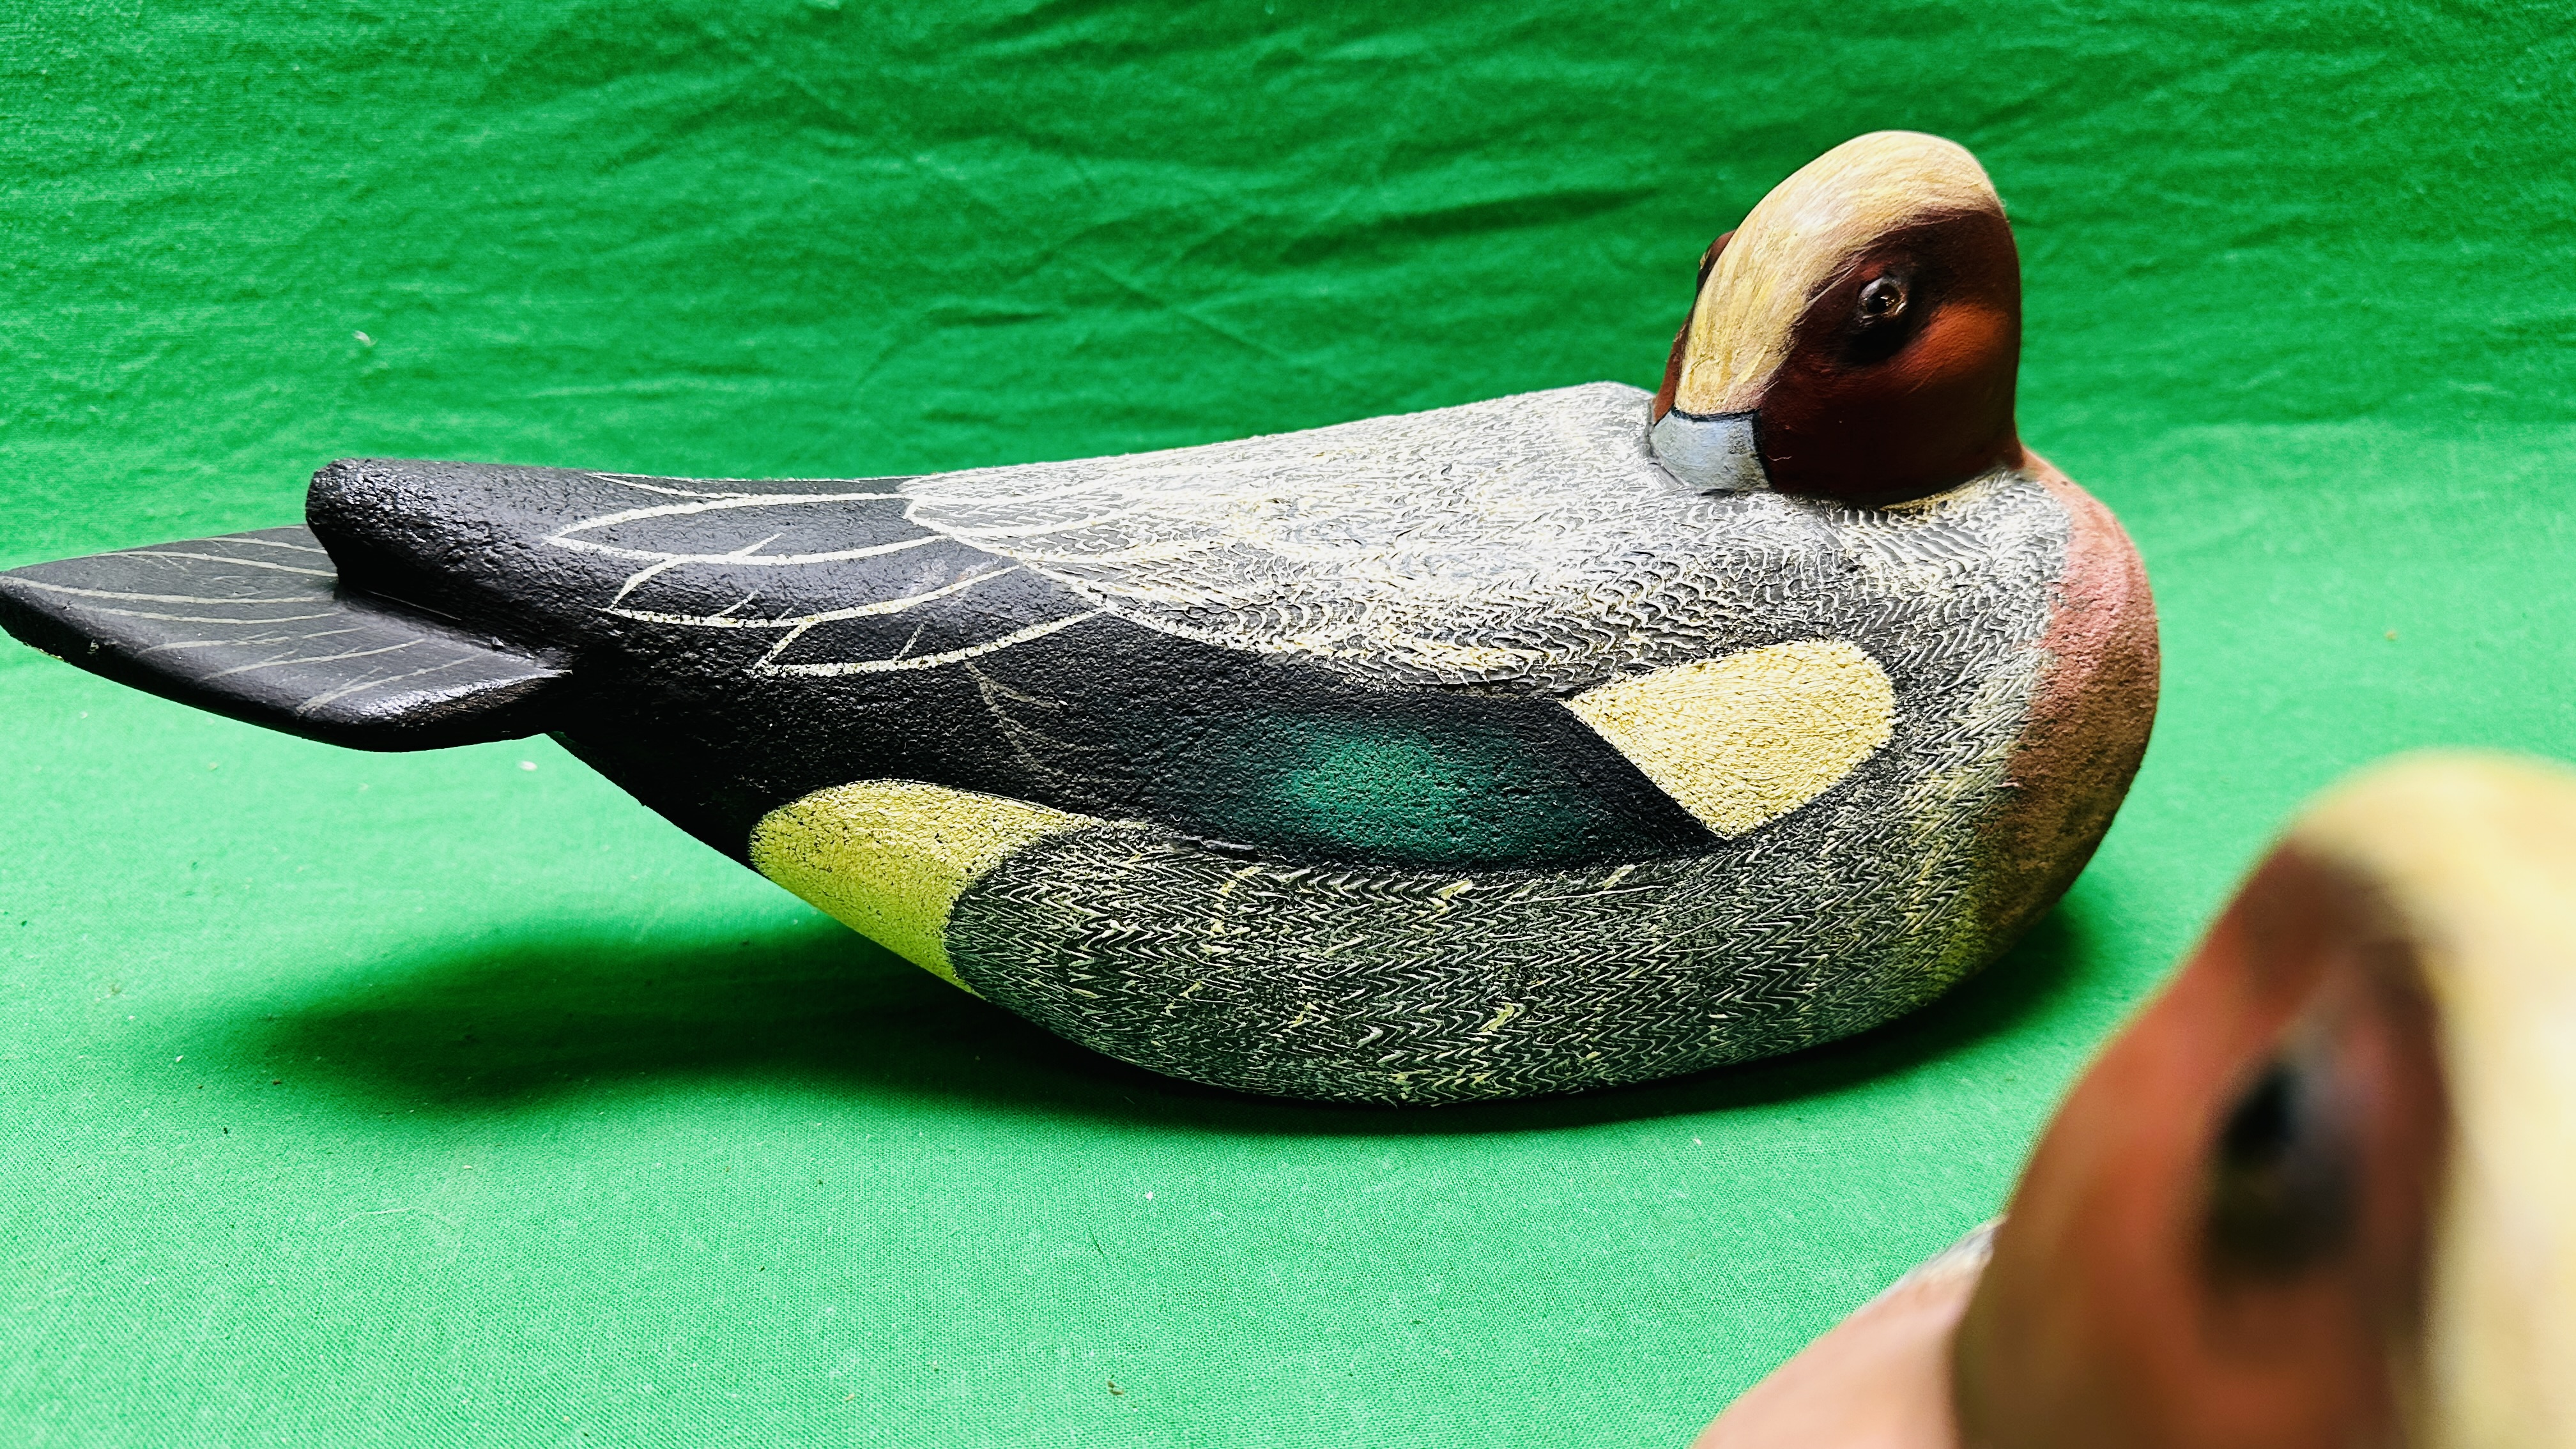 A HANDCRAFTED SET OF THREE DUCK DECOYS HAVING HANDPAINTED DETAIL AND GLASS EYES. - Image 4 of 8